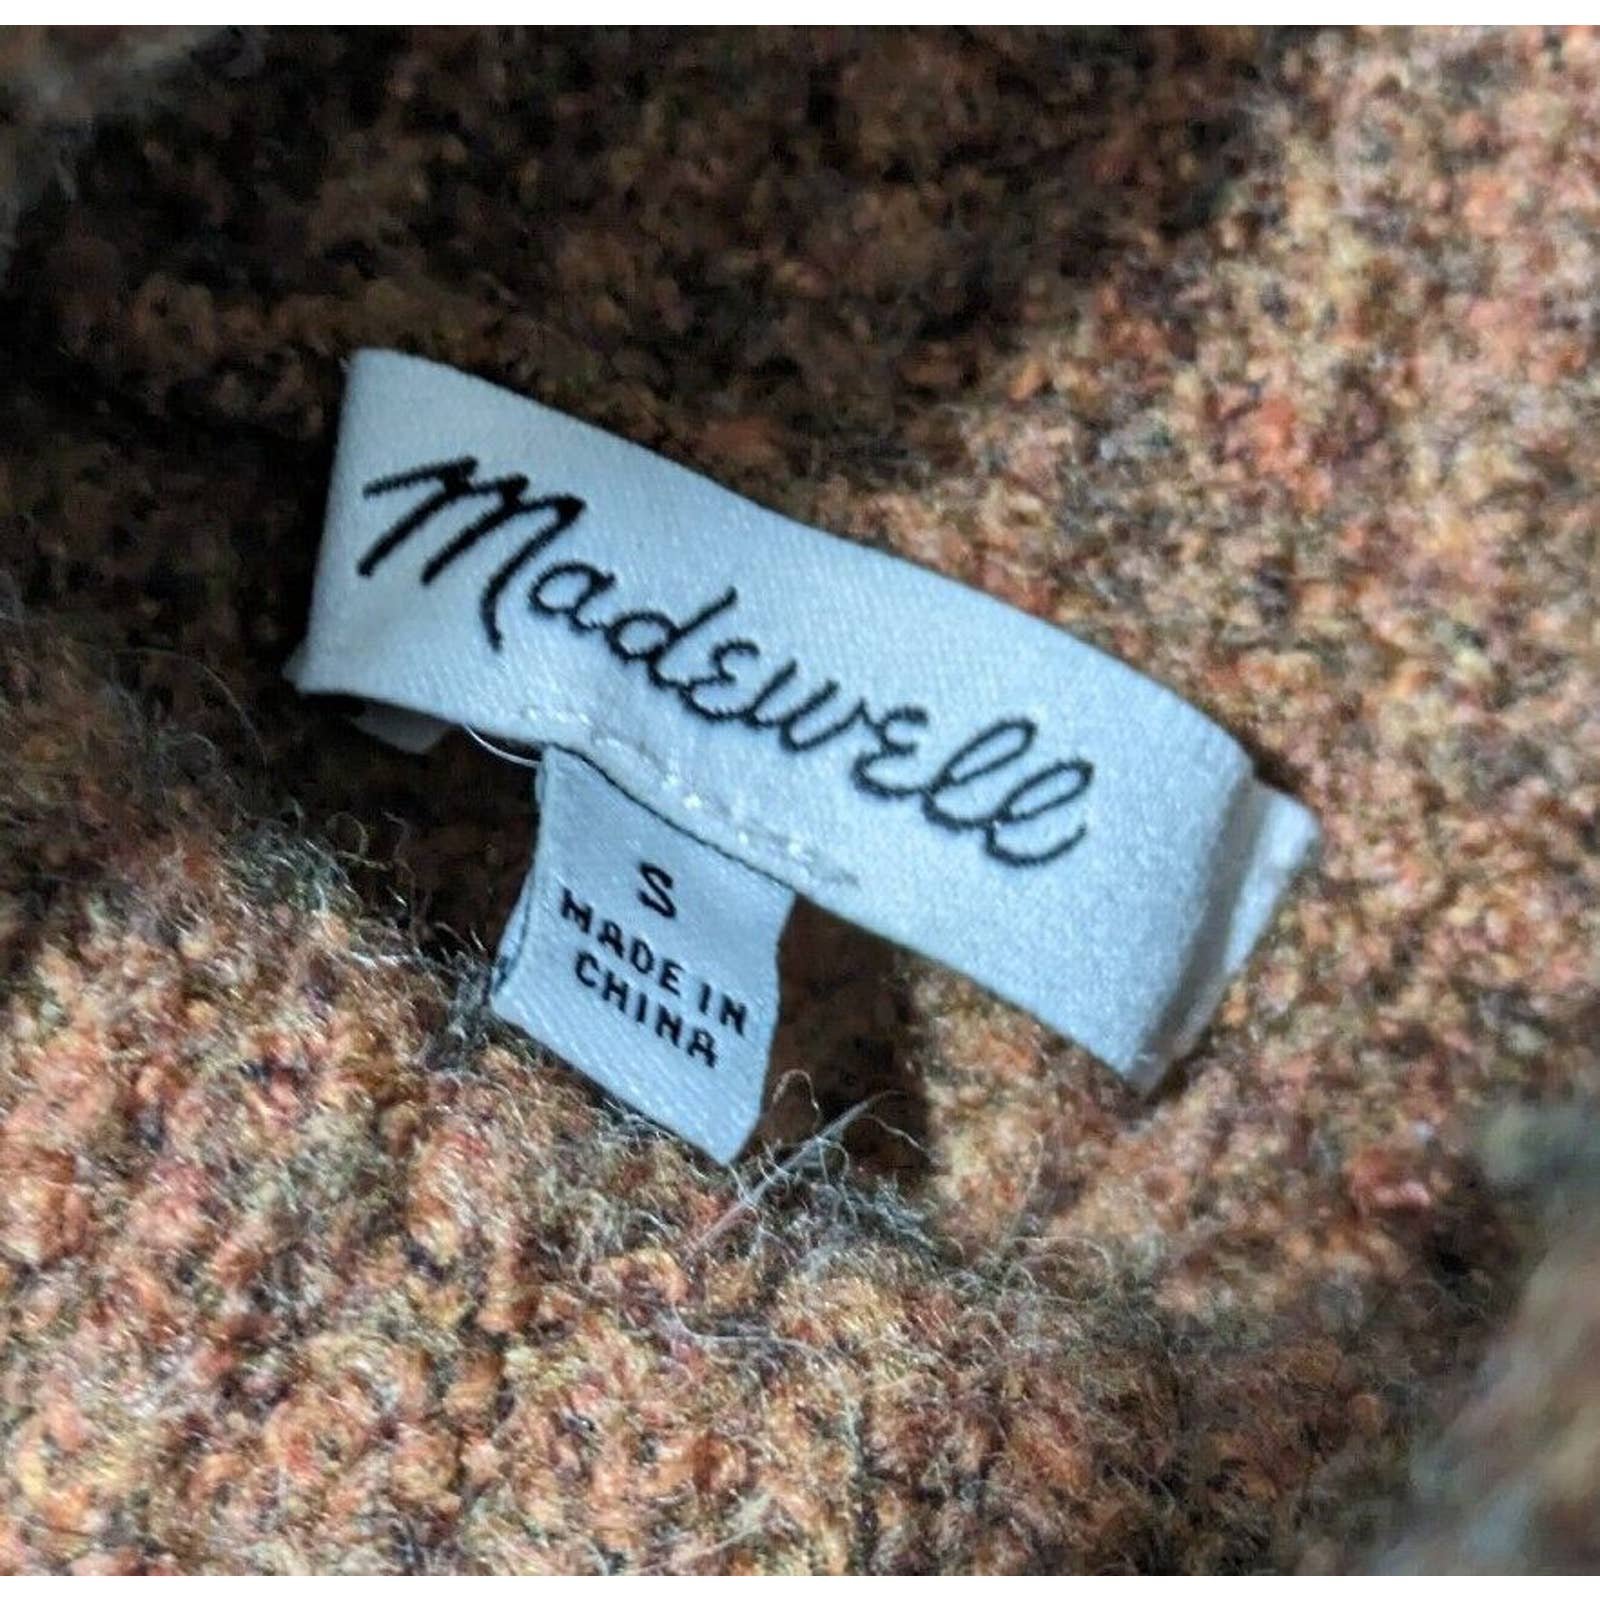 good price Madewell Mercer Turtleneck Sweater in Coziest Yarn Heather Cider Brown Sz Small PPeptAU9j Outlet Store